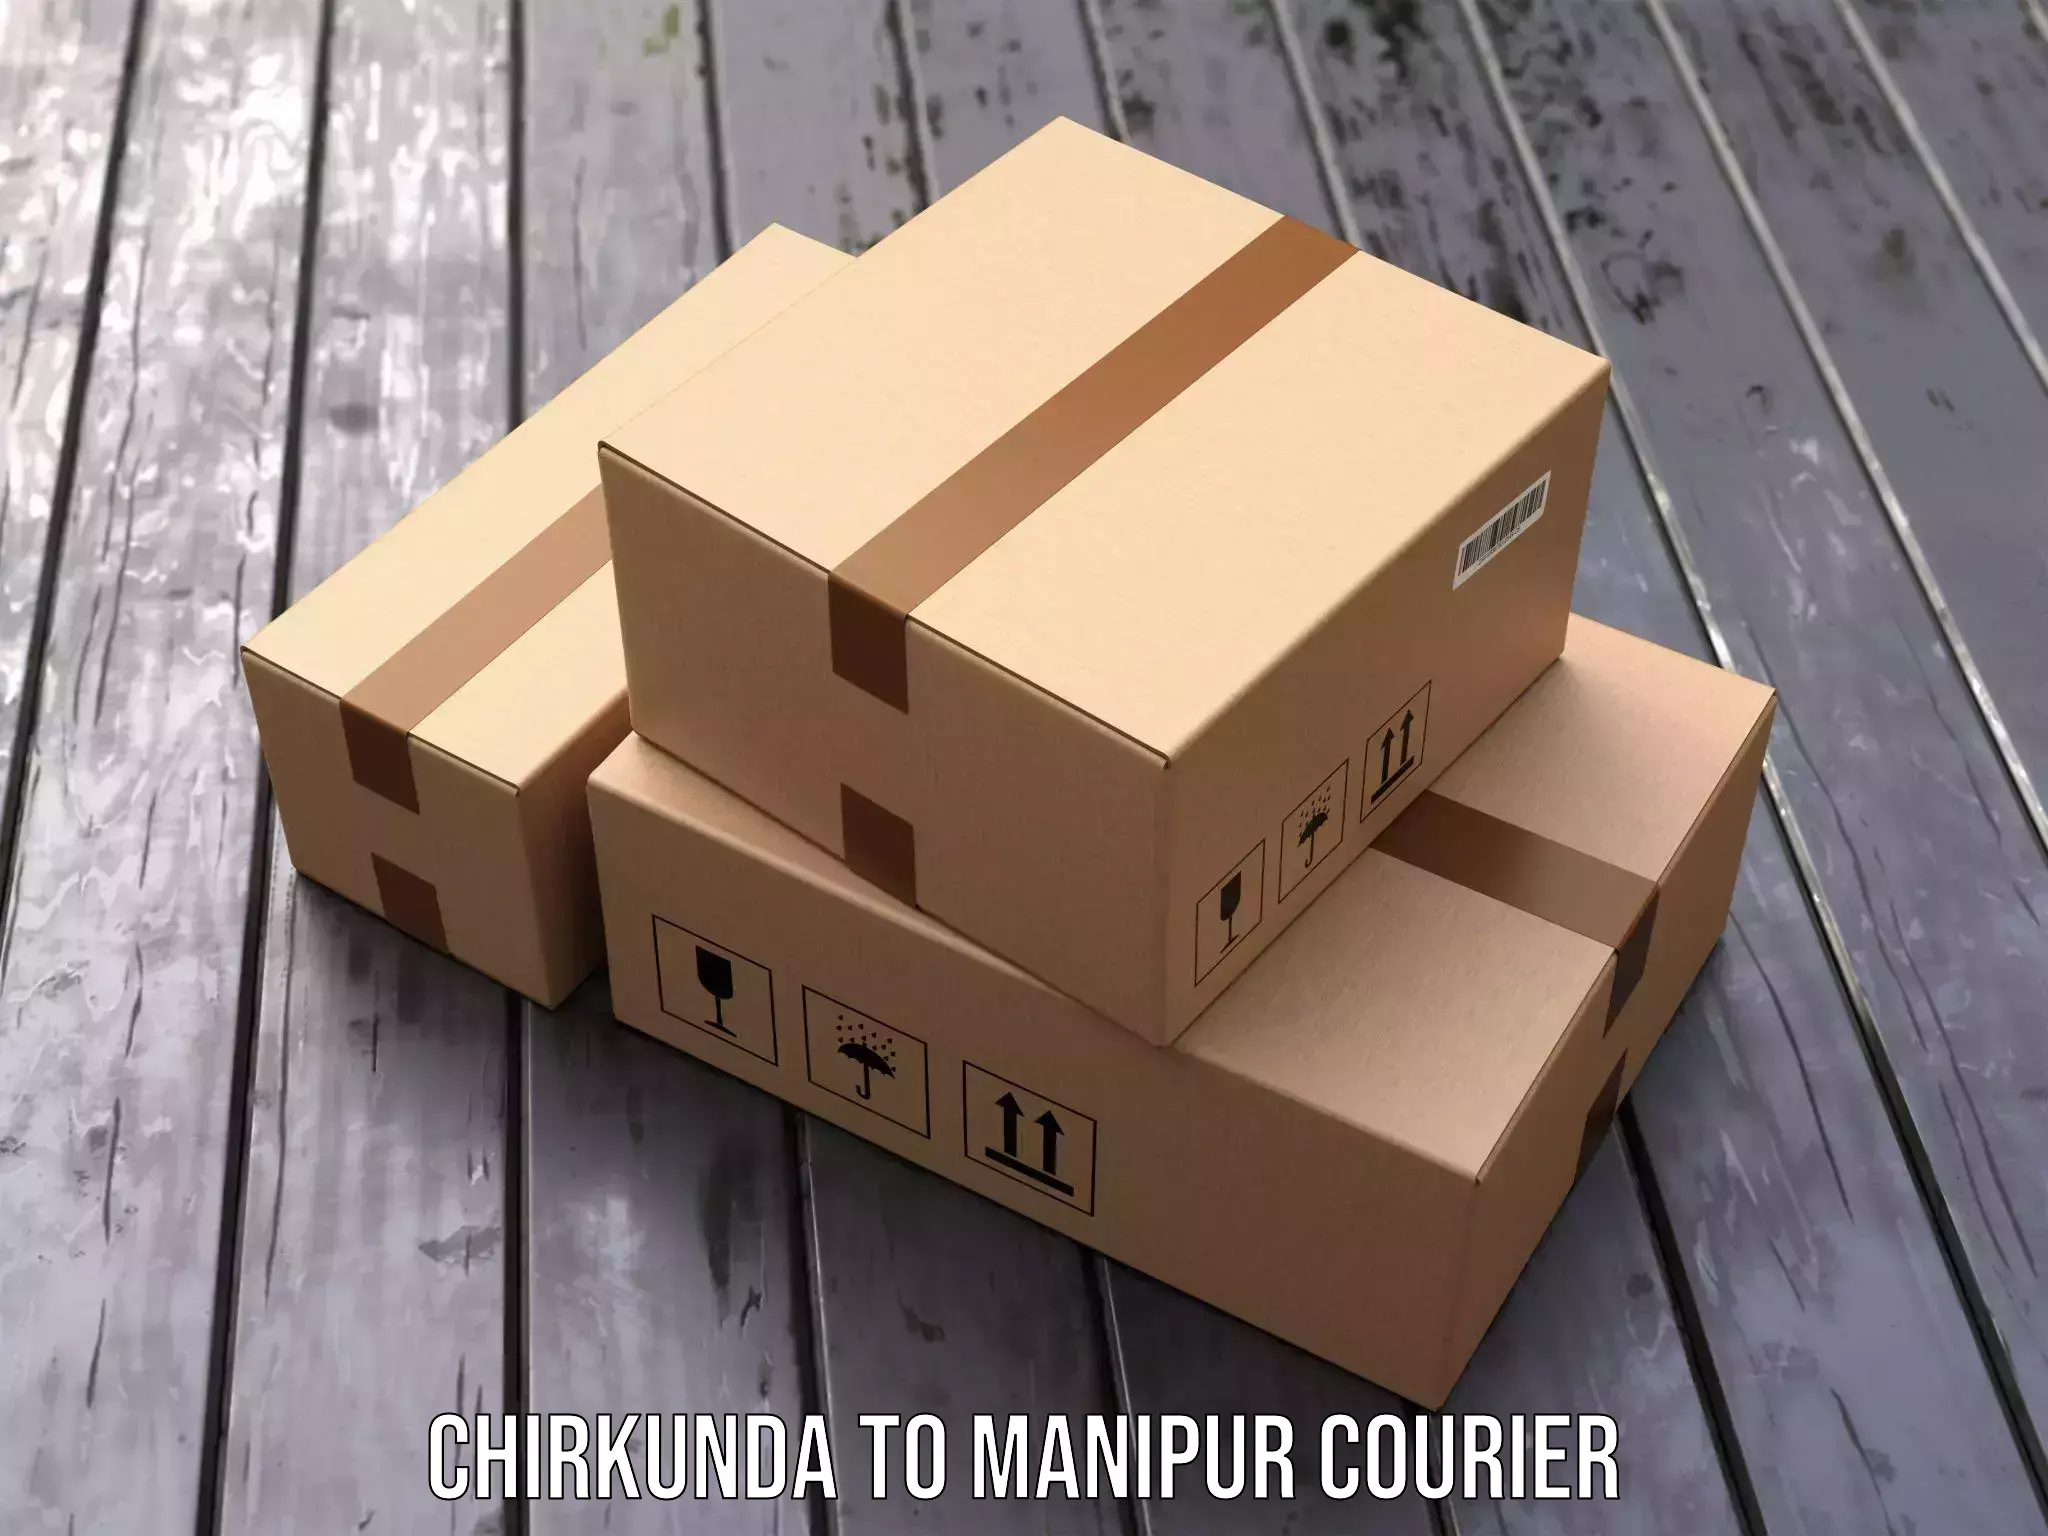 Courier service booking Chirkunda to Imphal